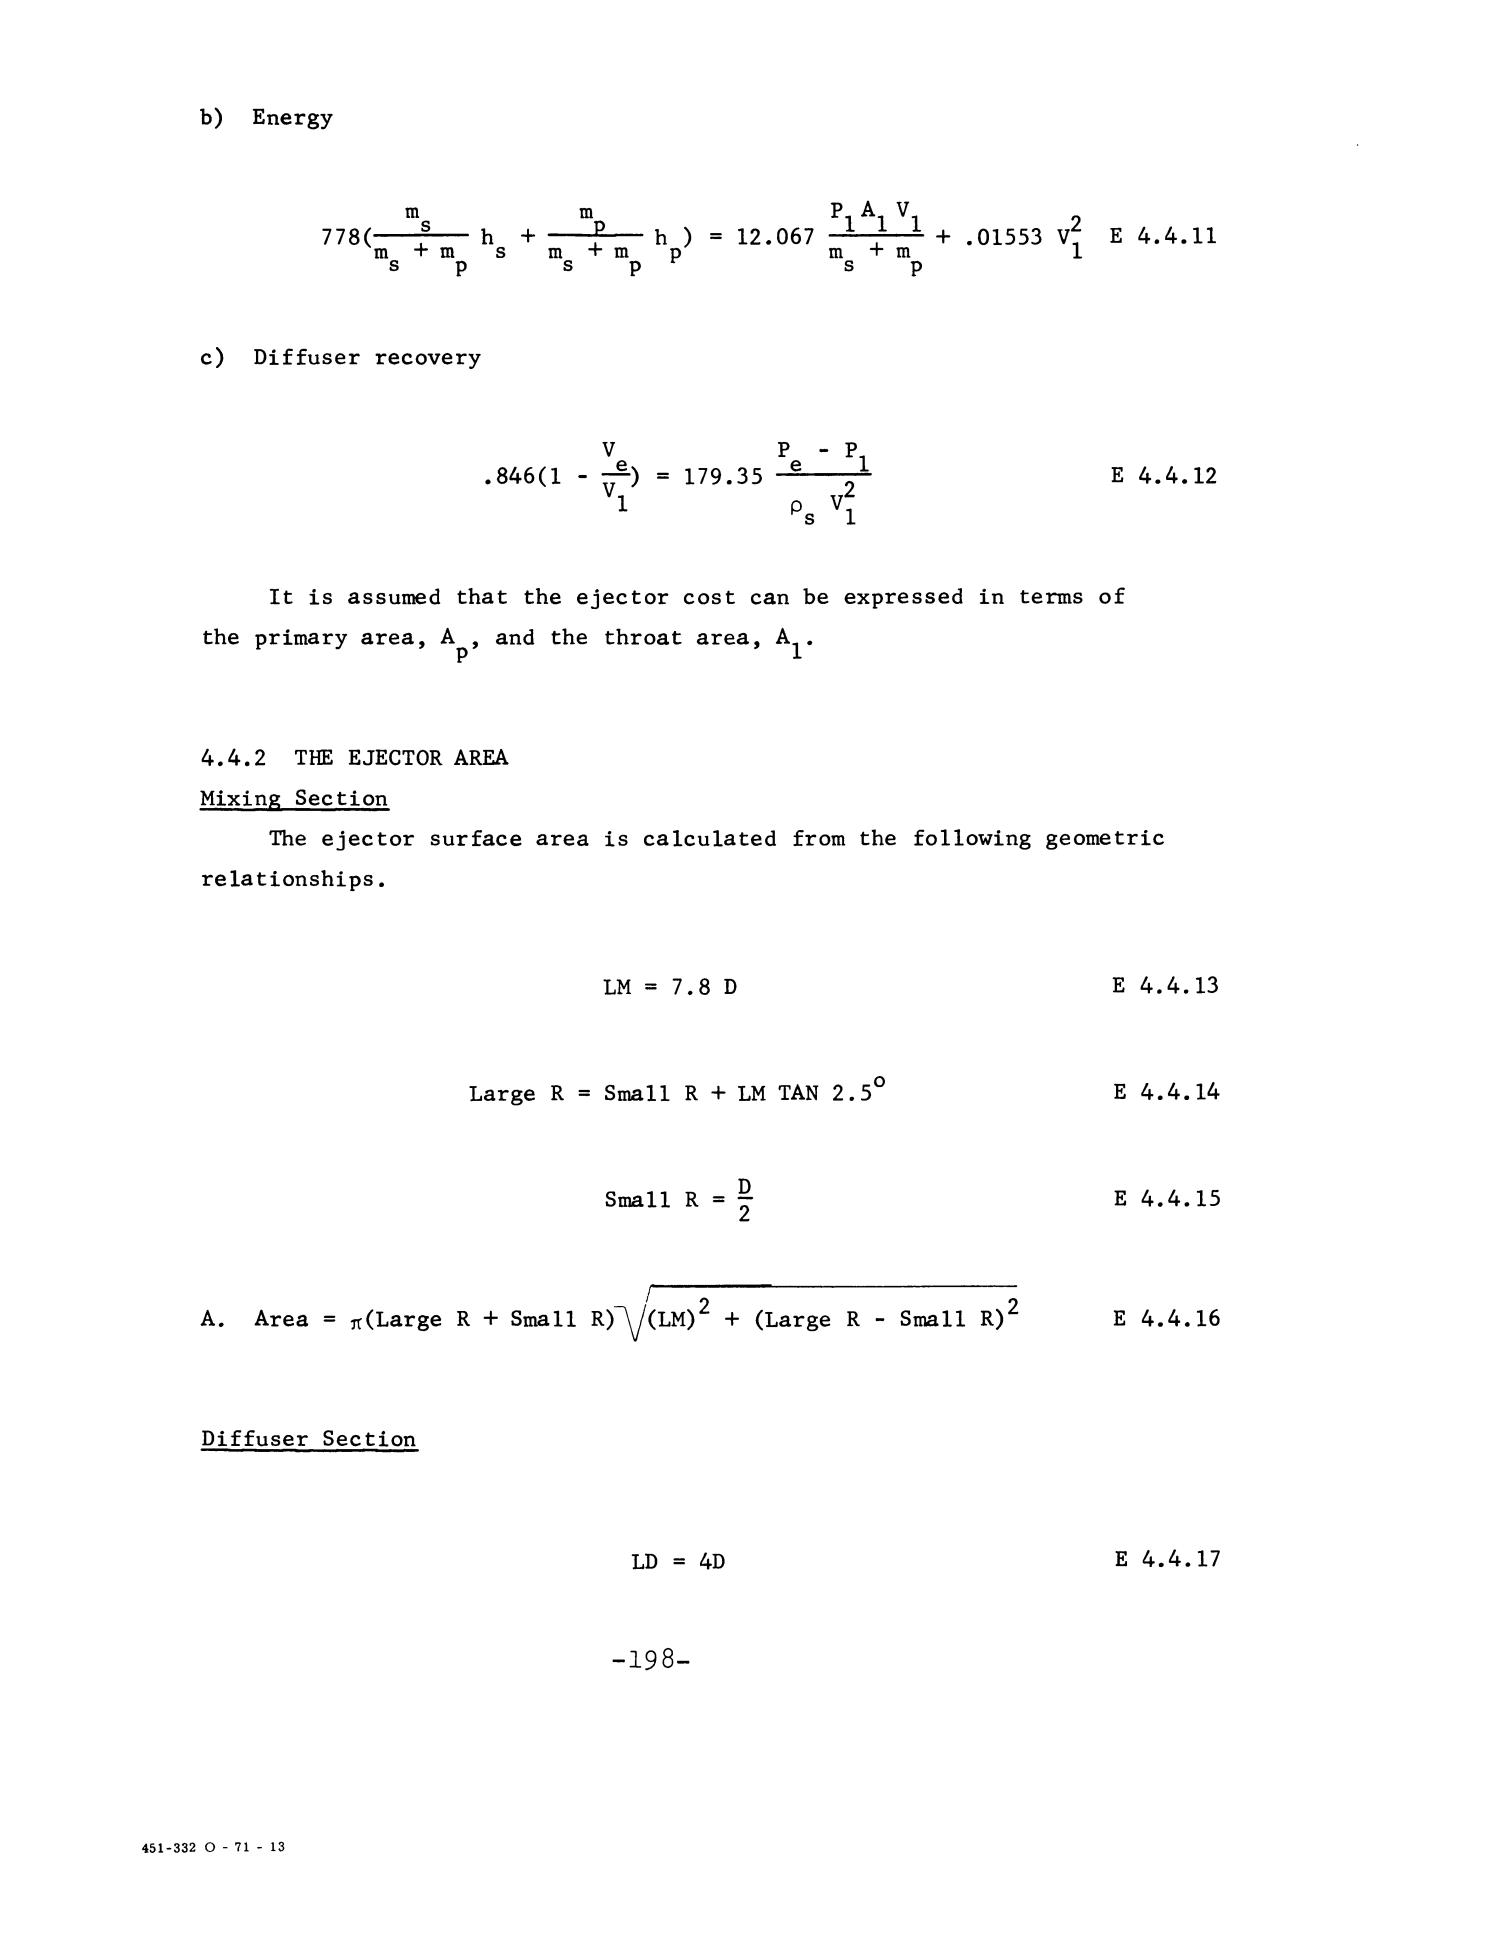 Bench Scale Study of the Vacuum Freezing Ejector Absorption Process
                                                
                                                    198
                                                